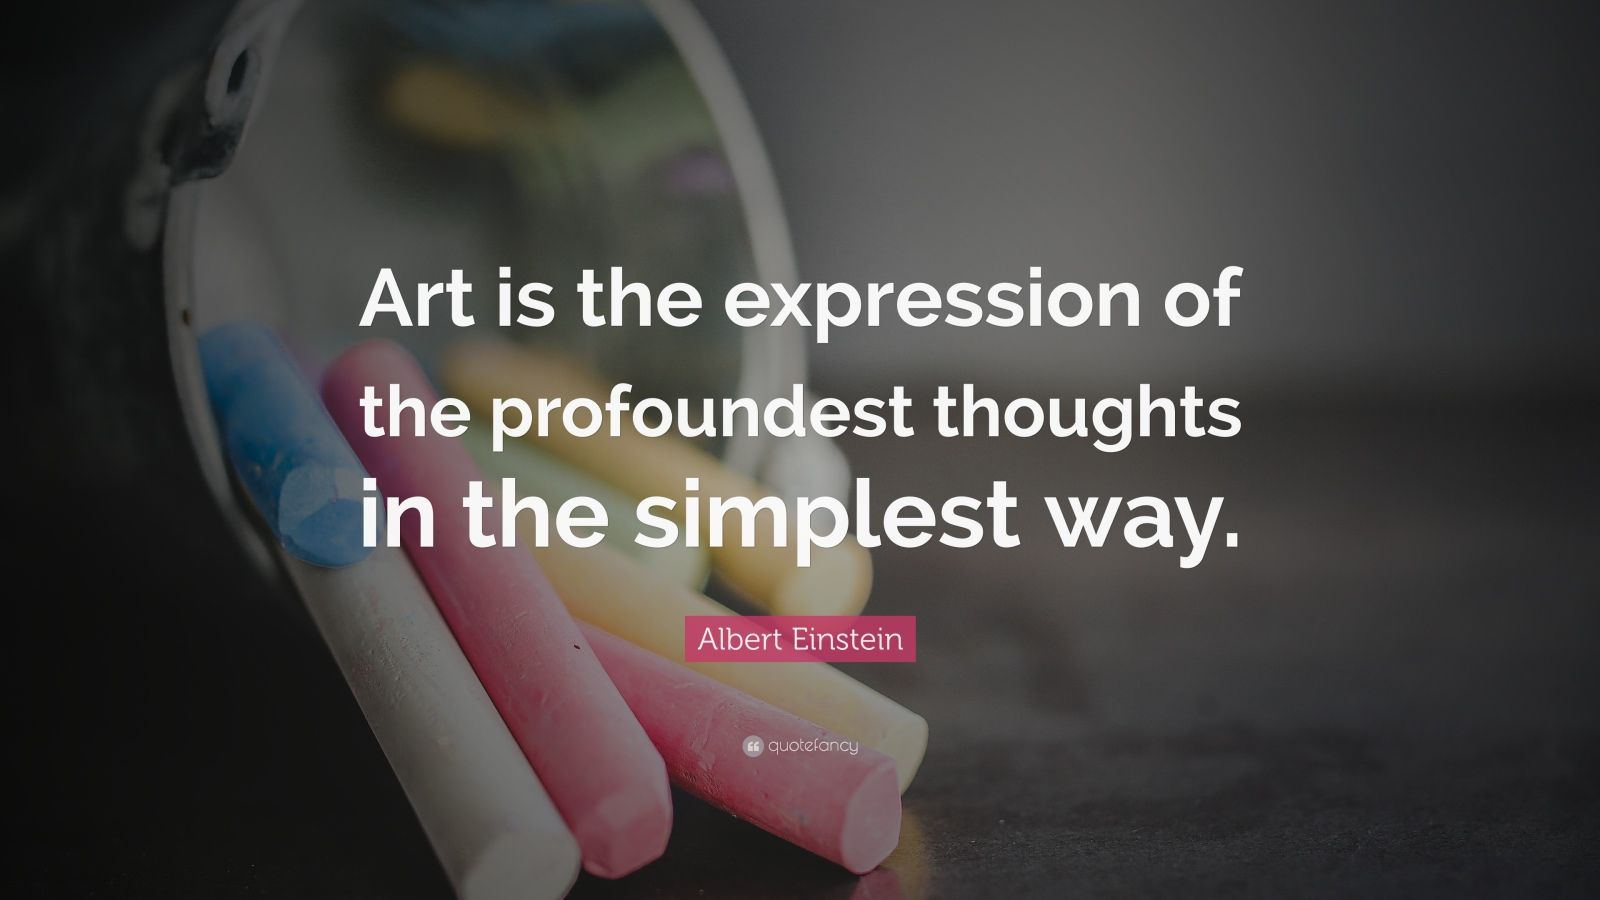 Albert Einstein Quote: “Art is the expression of the profoundest